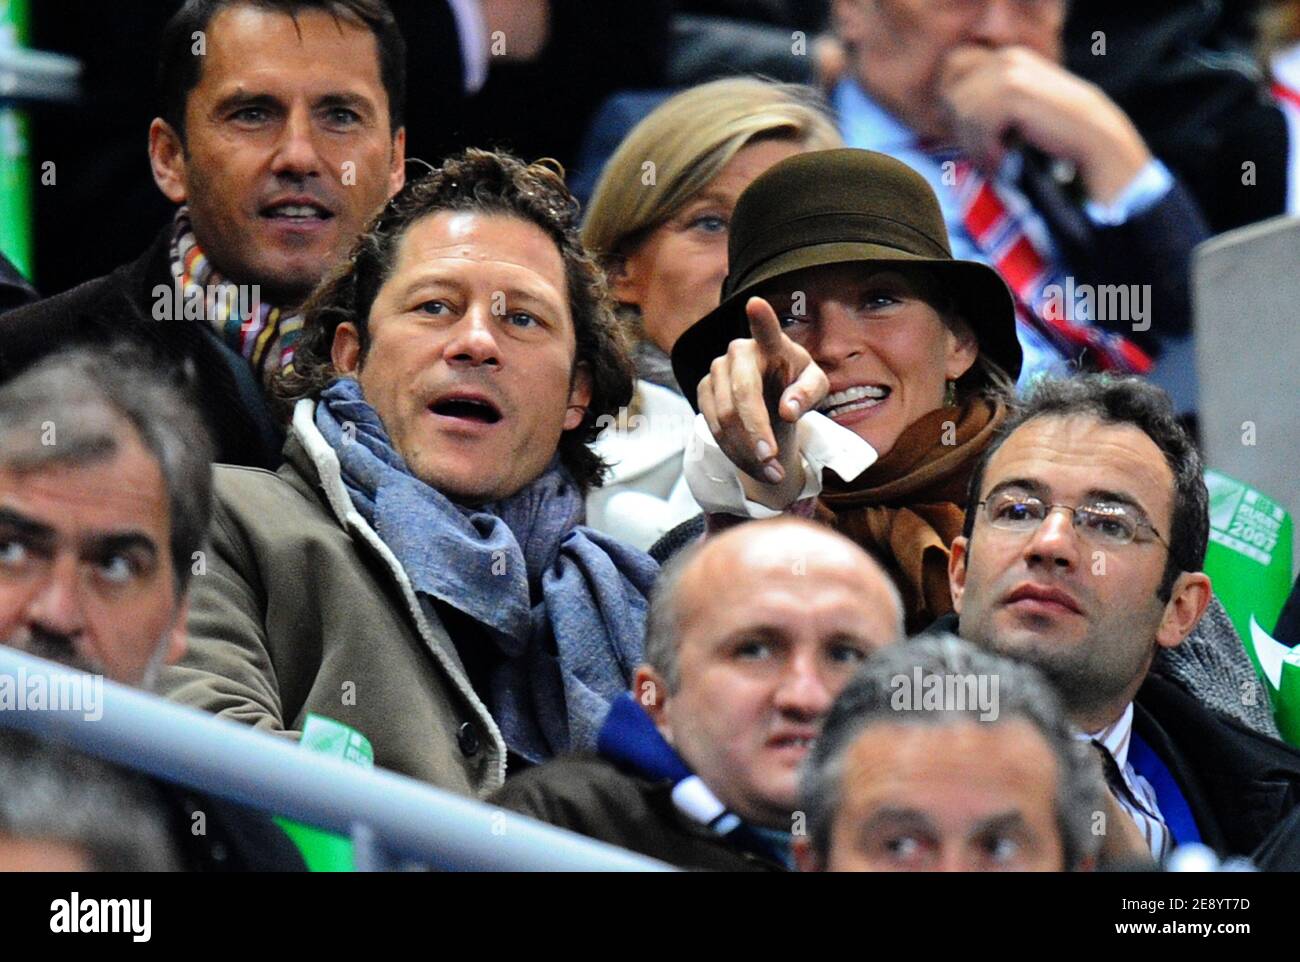 US actress Uma Thurman with her new boyfriend Arpad Busson attend the IRB Rugby World Cup 2007, Final, England vs South Africa at the Stade de France in Saint-Denis near Paris, France on October 20, 2007. Photo by Gouhier-Morton-Taamallah/Cameleon/ABACAPRESS.COM Stock Photo